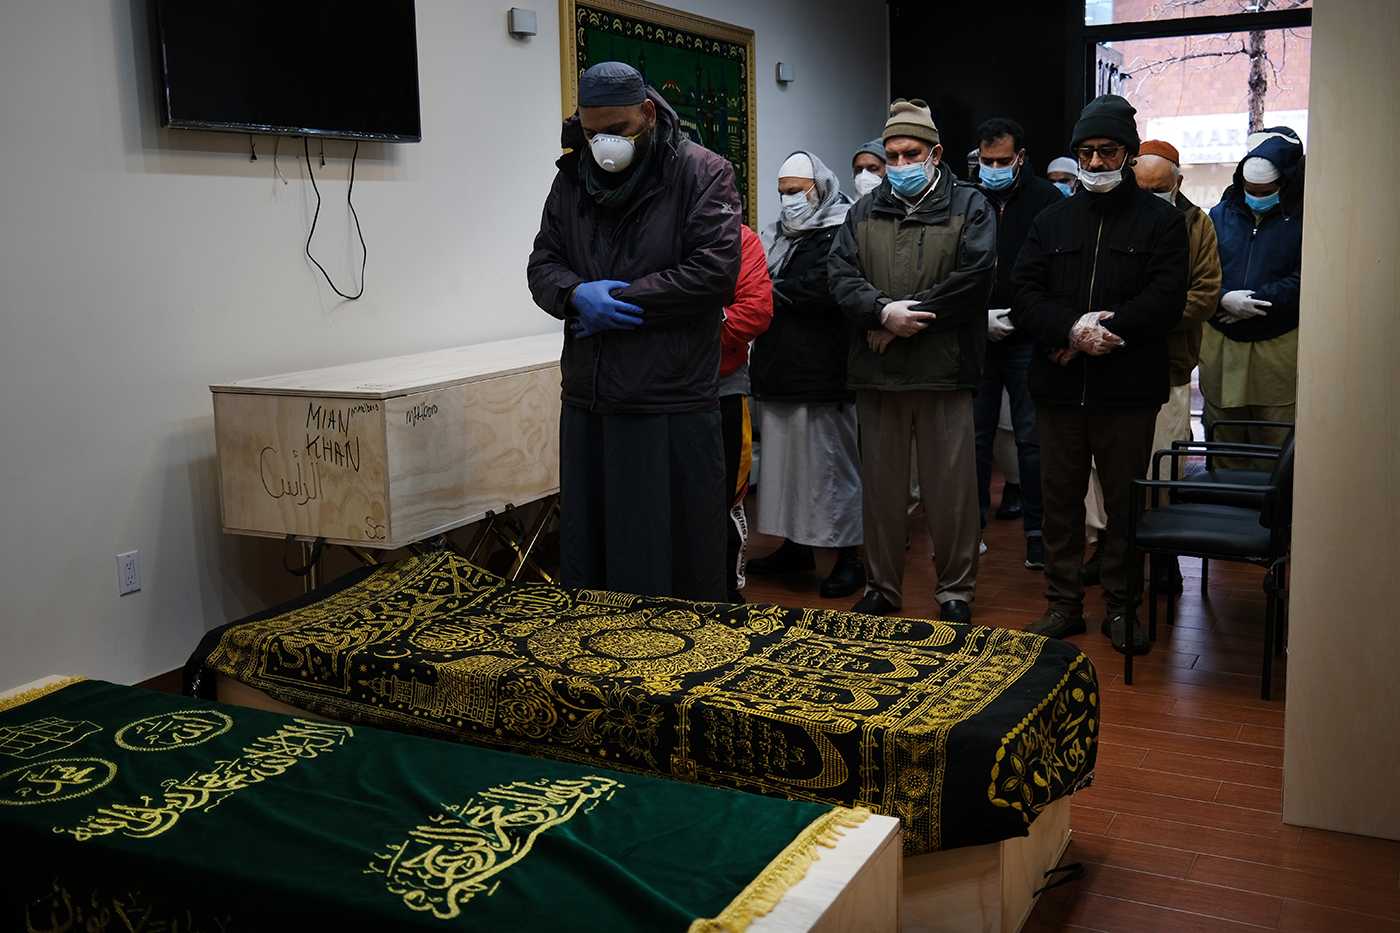 How Muslims Are Mourning Without Proper Death Care Rituals